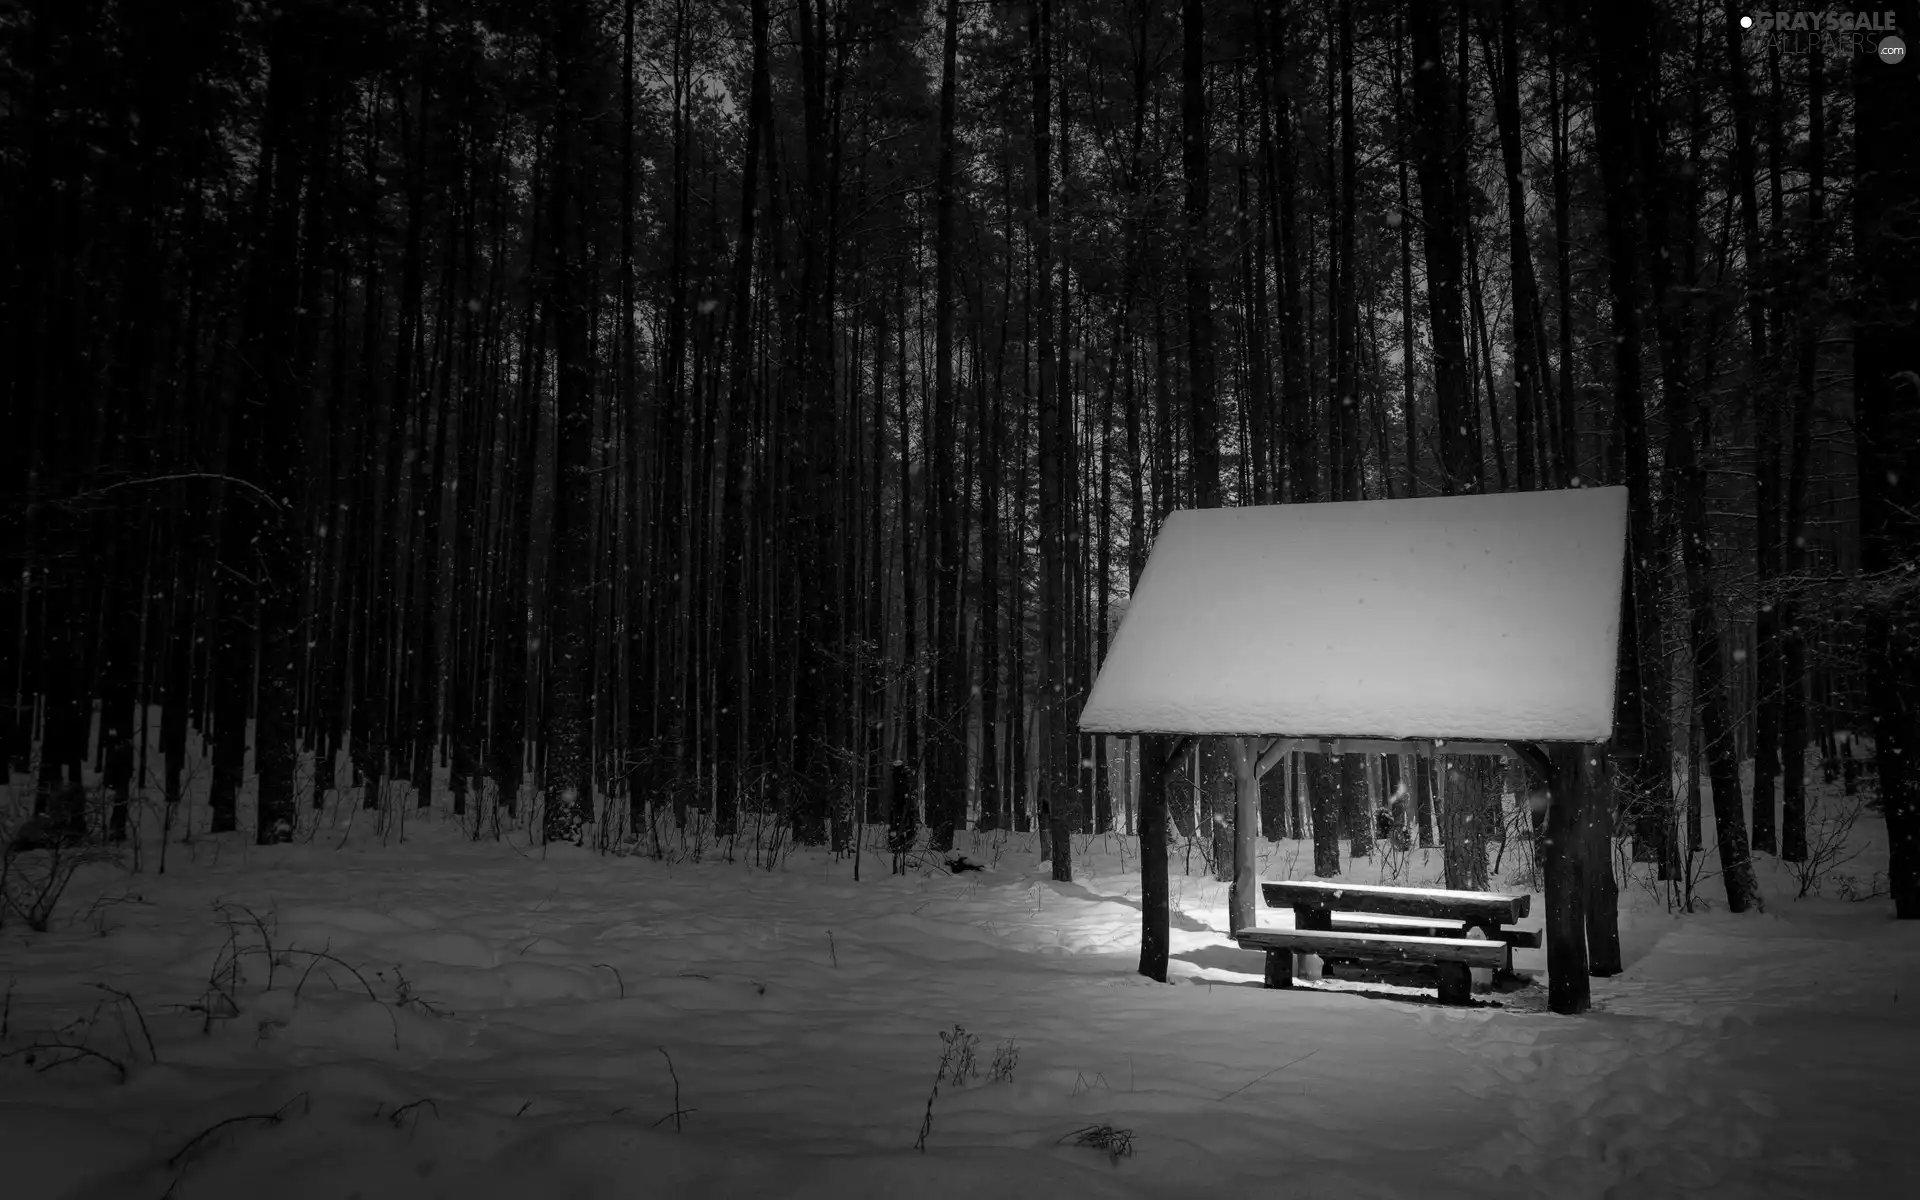 Bench, winter, illuminated, shed, forest